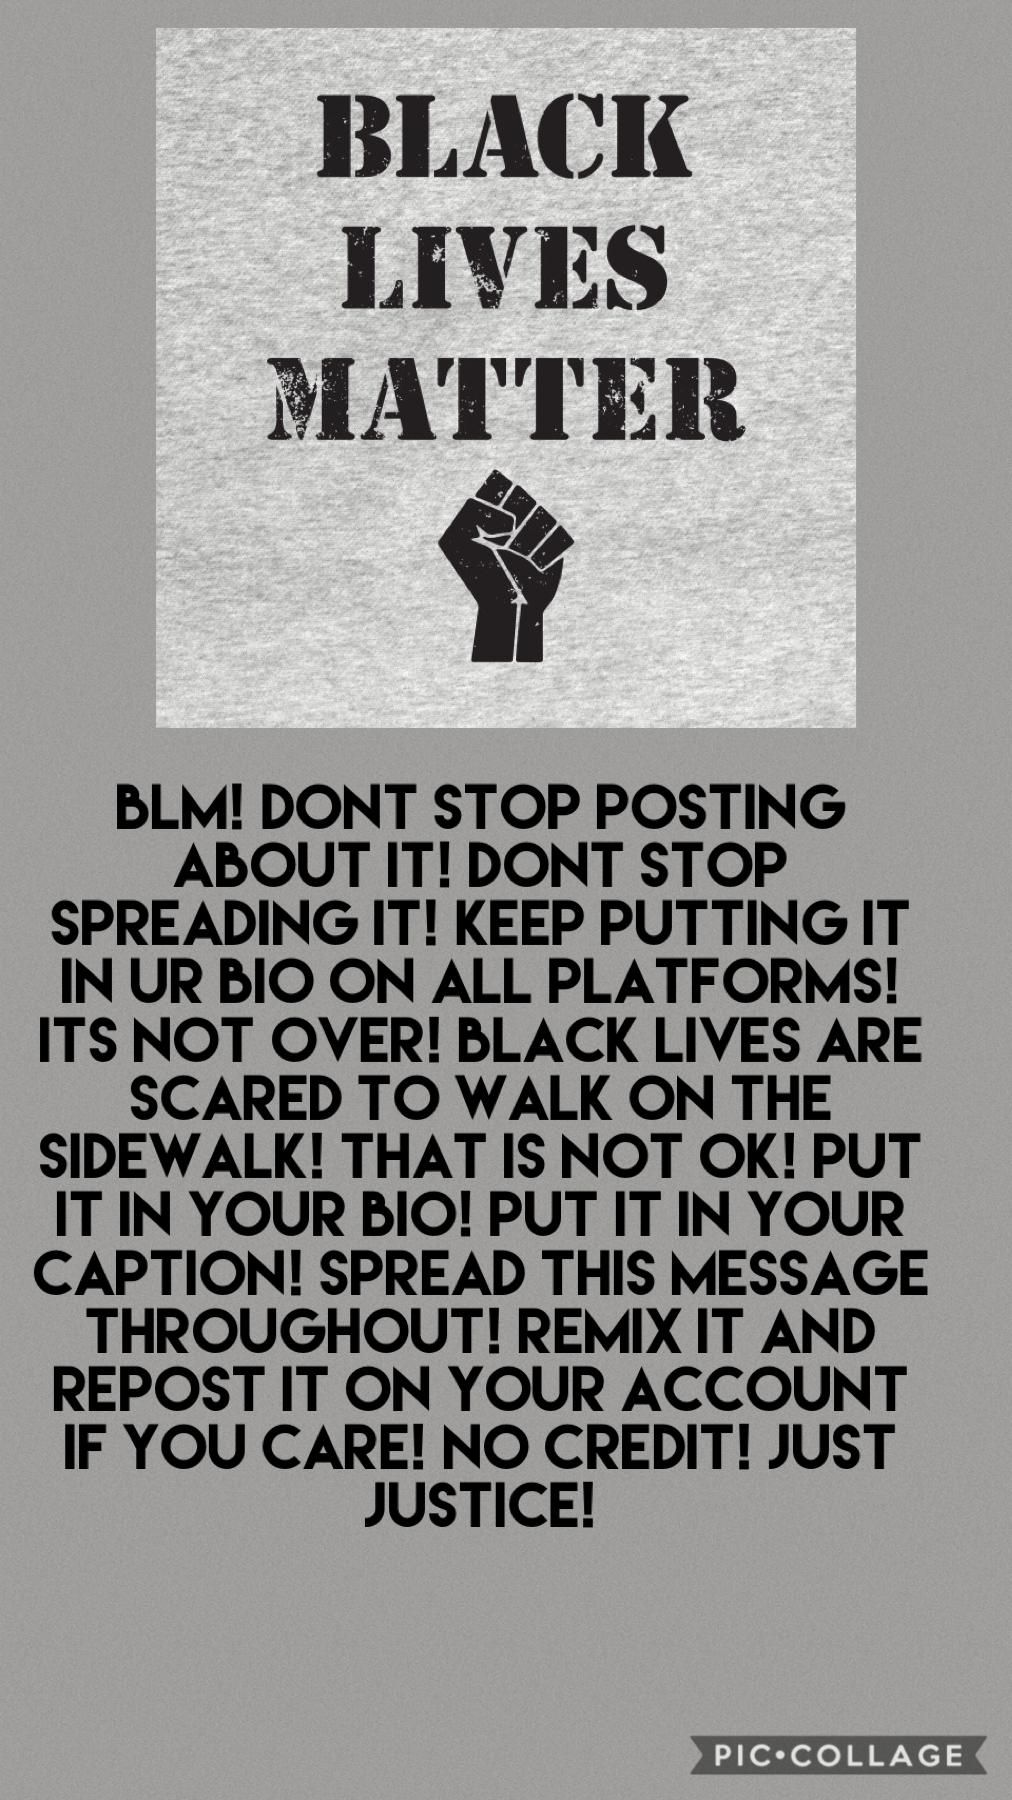 BLM! REMIX AND REPOST! SPREAD THIS MESSAGE THROUGHOUT 